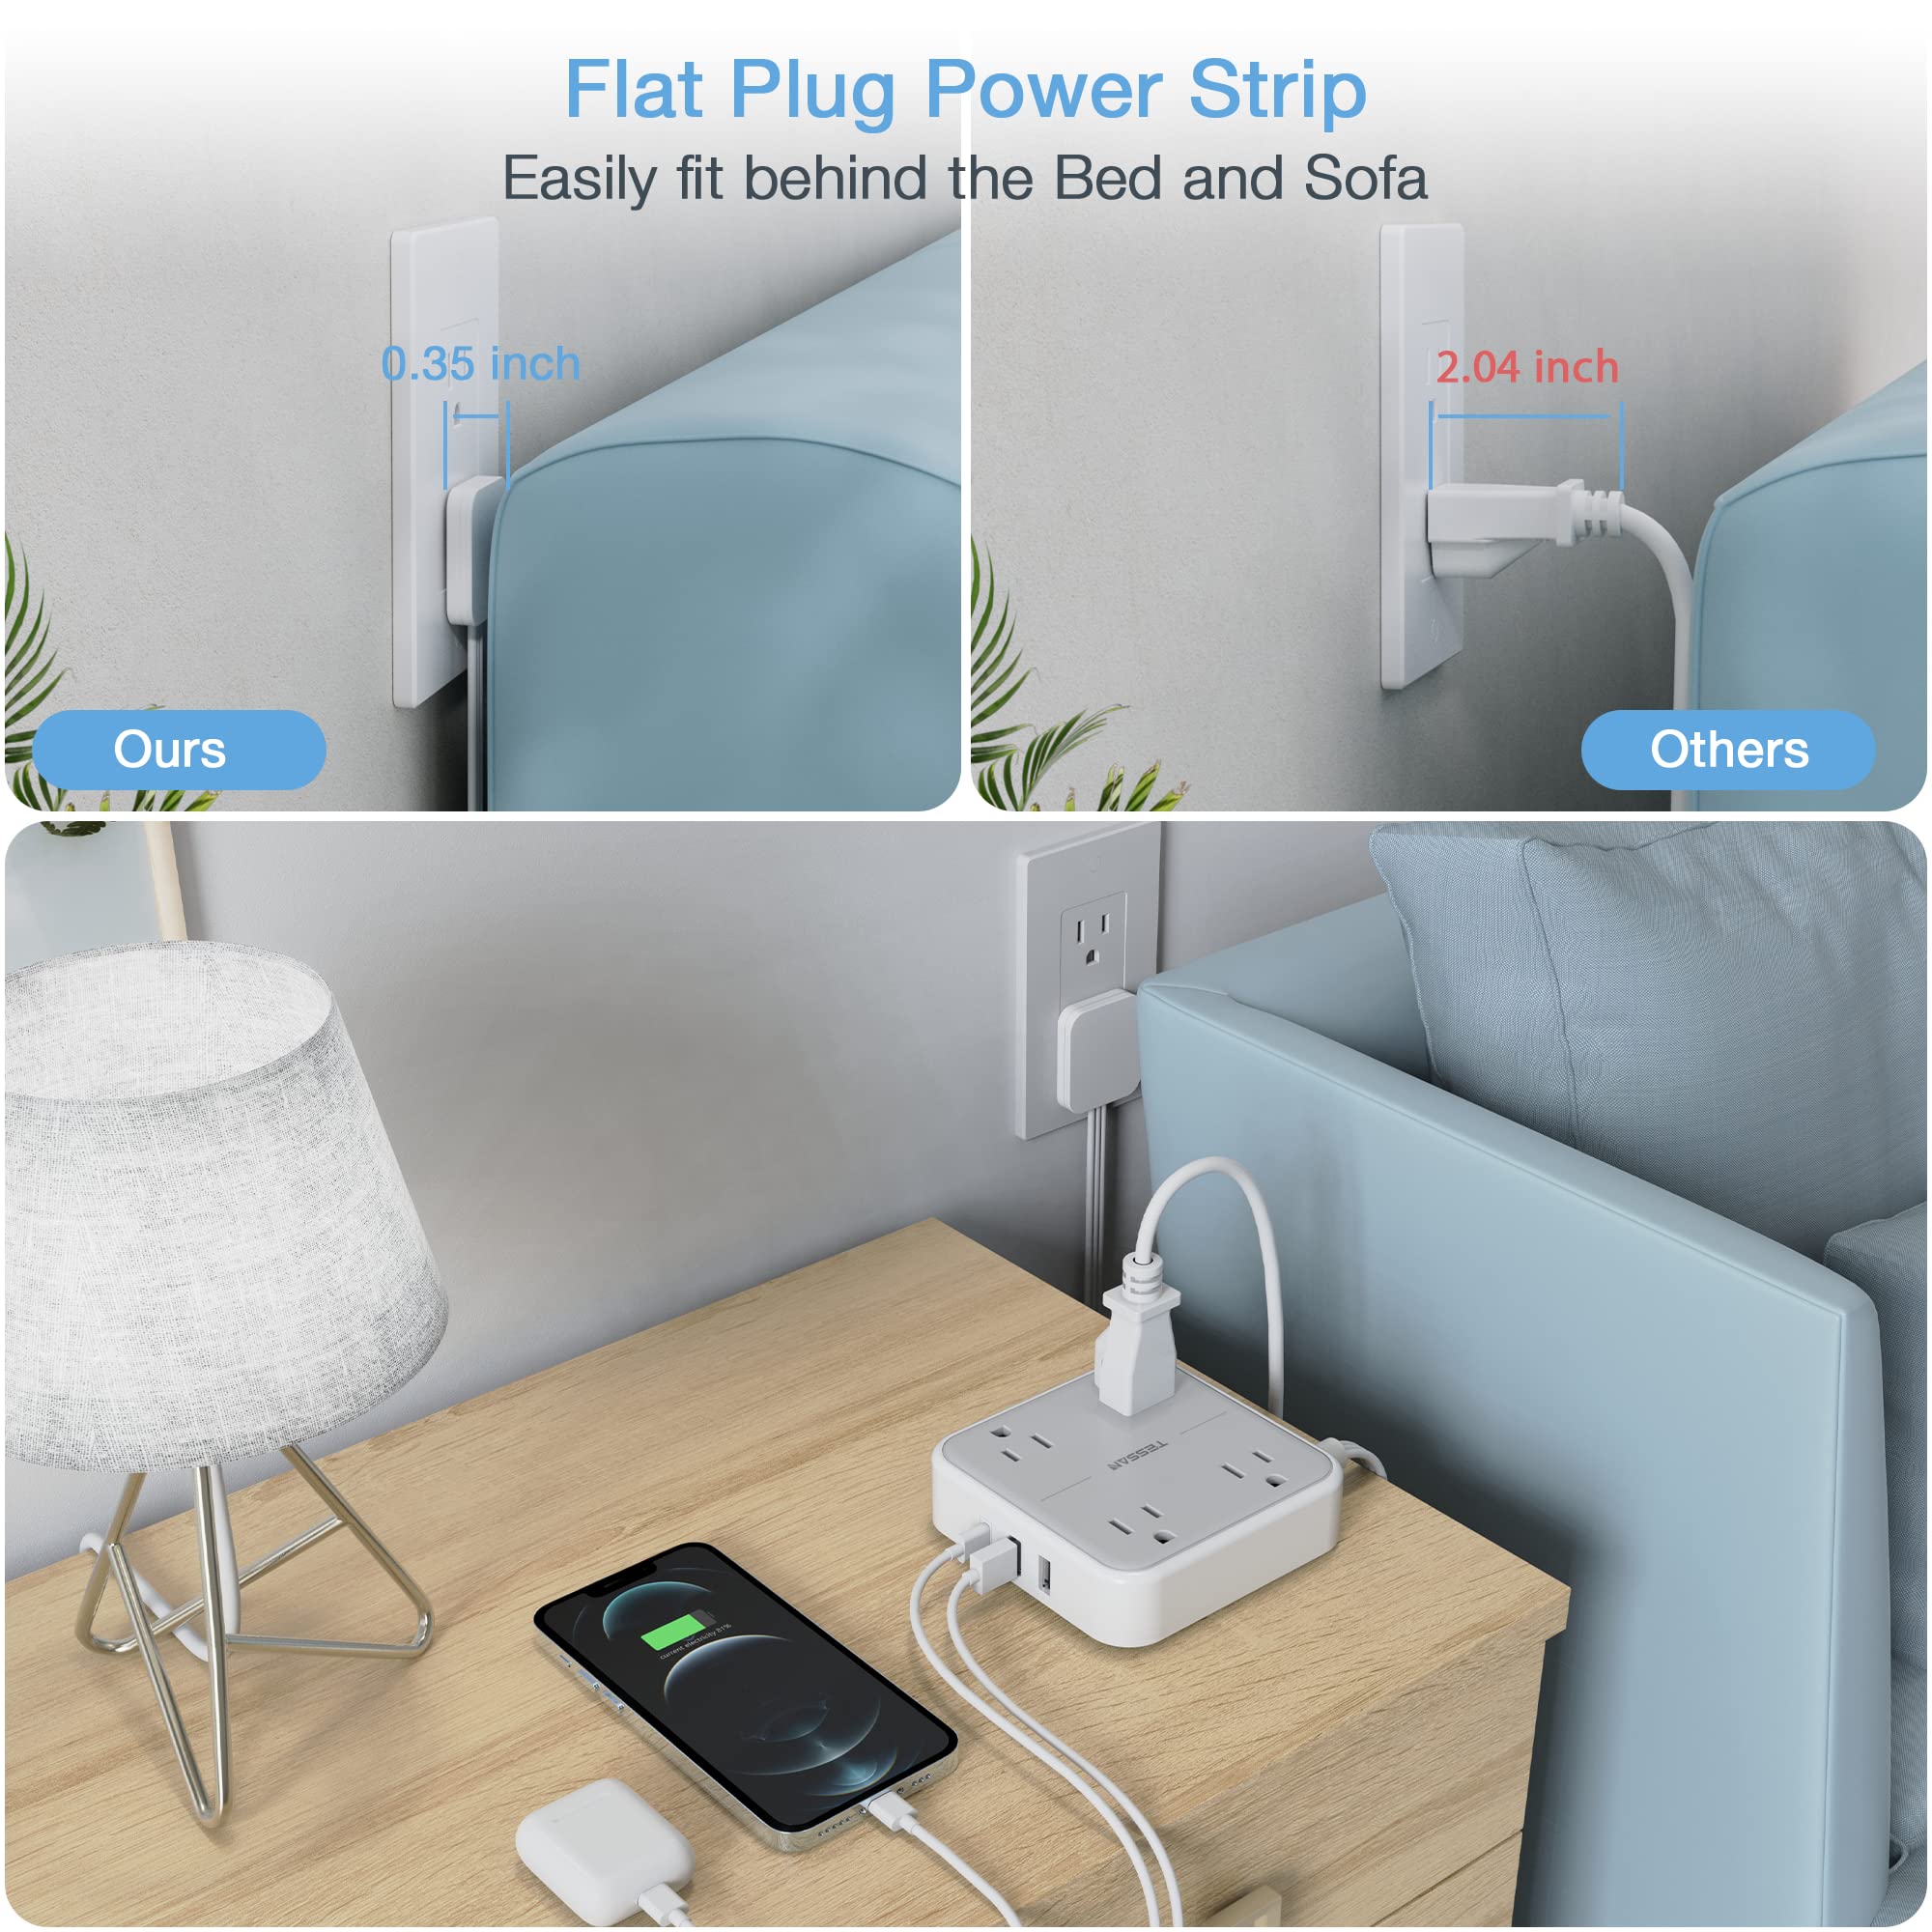 Flat Plug Power Strip, TESSAN 5 ft Ultra Thin Extension Cord with 3 USB Wall Charger(1 USB C Port), 4 Outlets Slim Desk Charging Station Compact for Travel, Office, School, Dorm Room Essentials